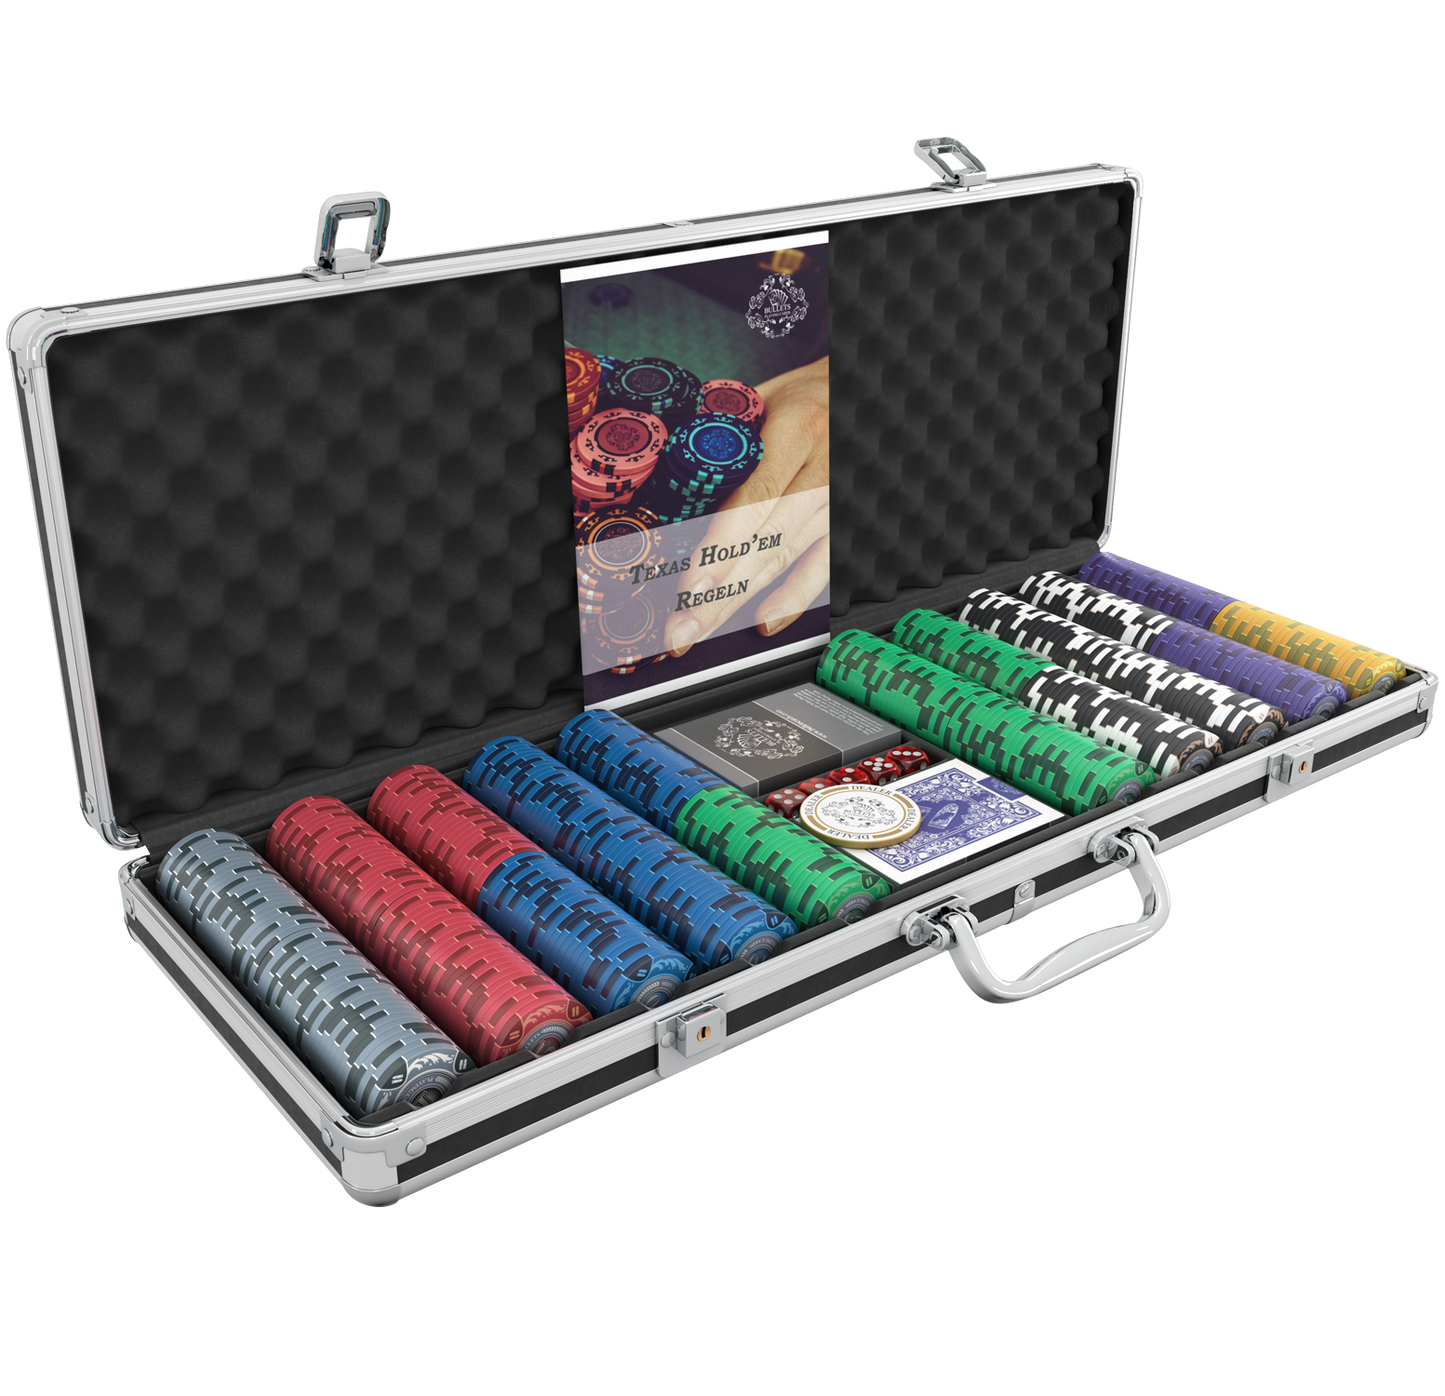 Poker case with 500 designer clay poker chips "Tony" with values